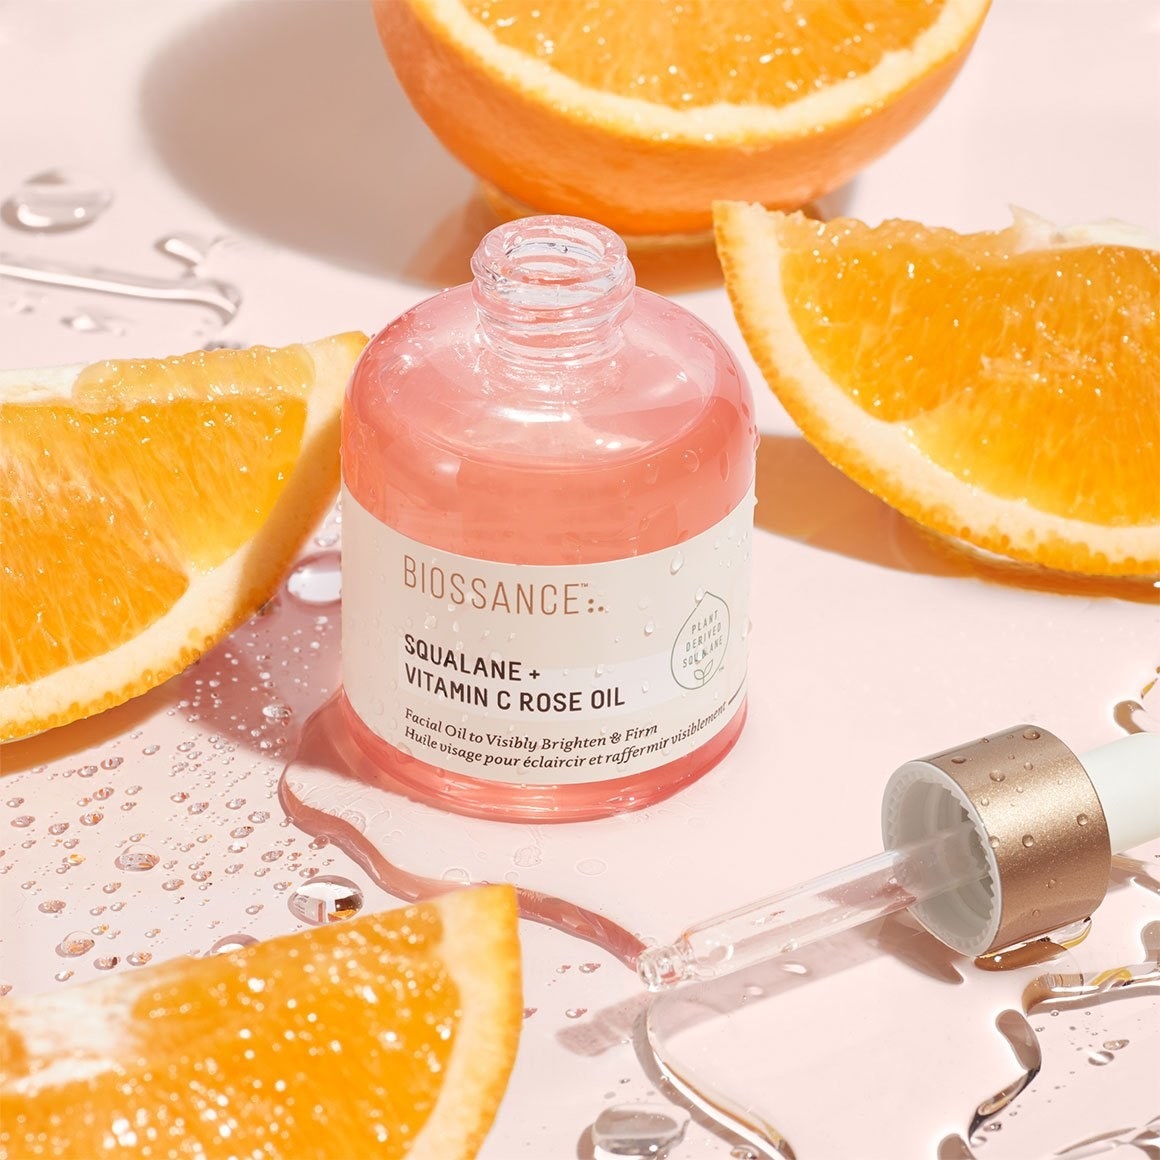 the pink bottle of serum uncapped with the applicator next to it, surrounded by orange slices